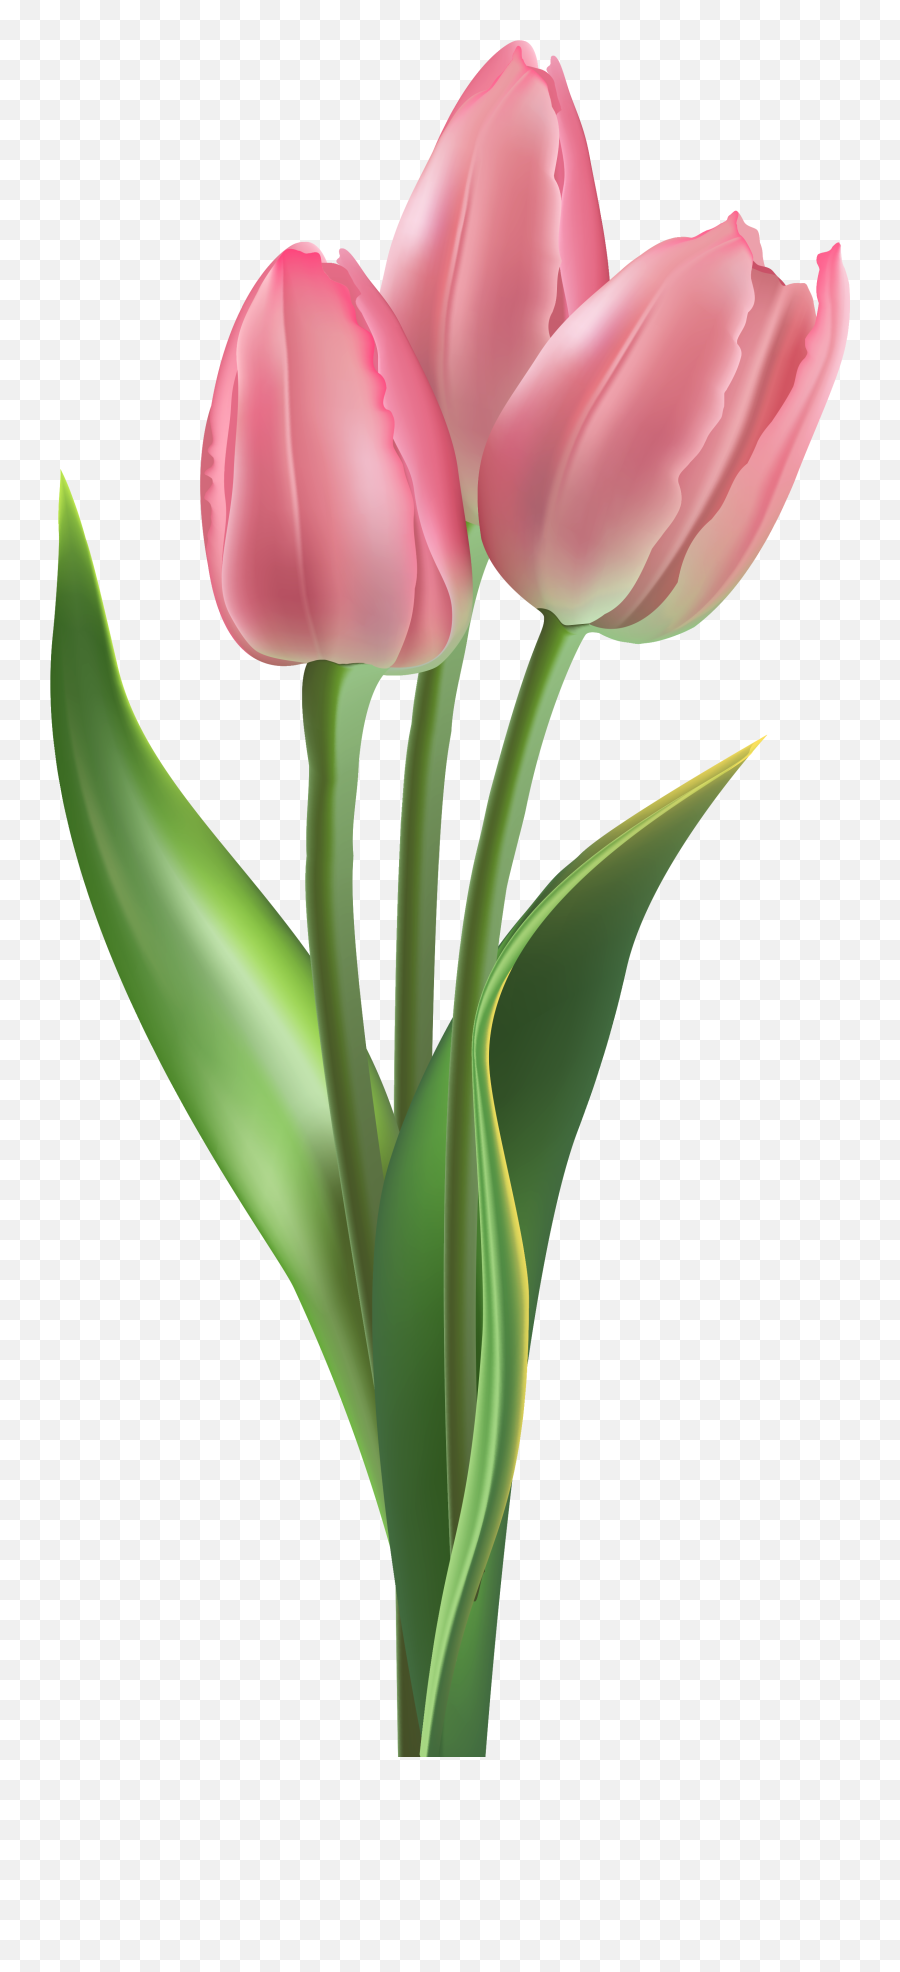 Pink Tulip Minecraft Flower Png Tulips Are Flowers - Pink Tulip Png Emoji,Tulip Emojis